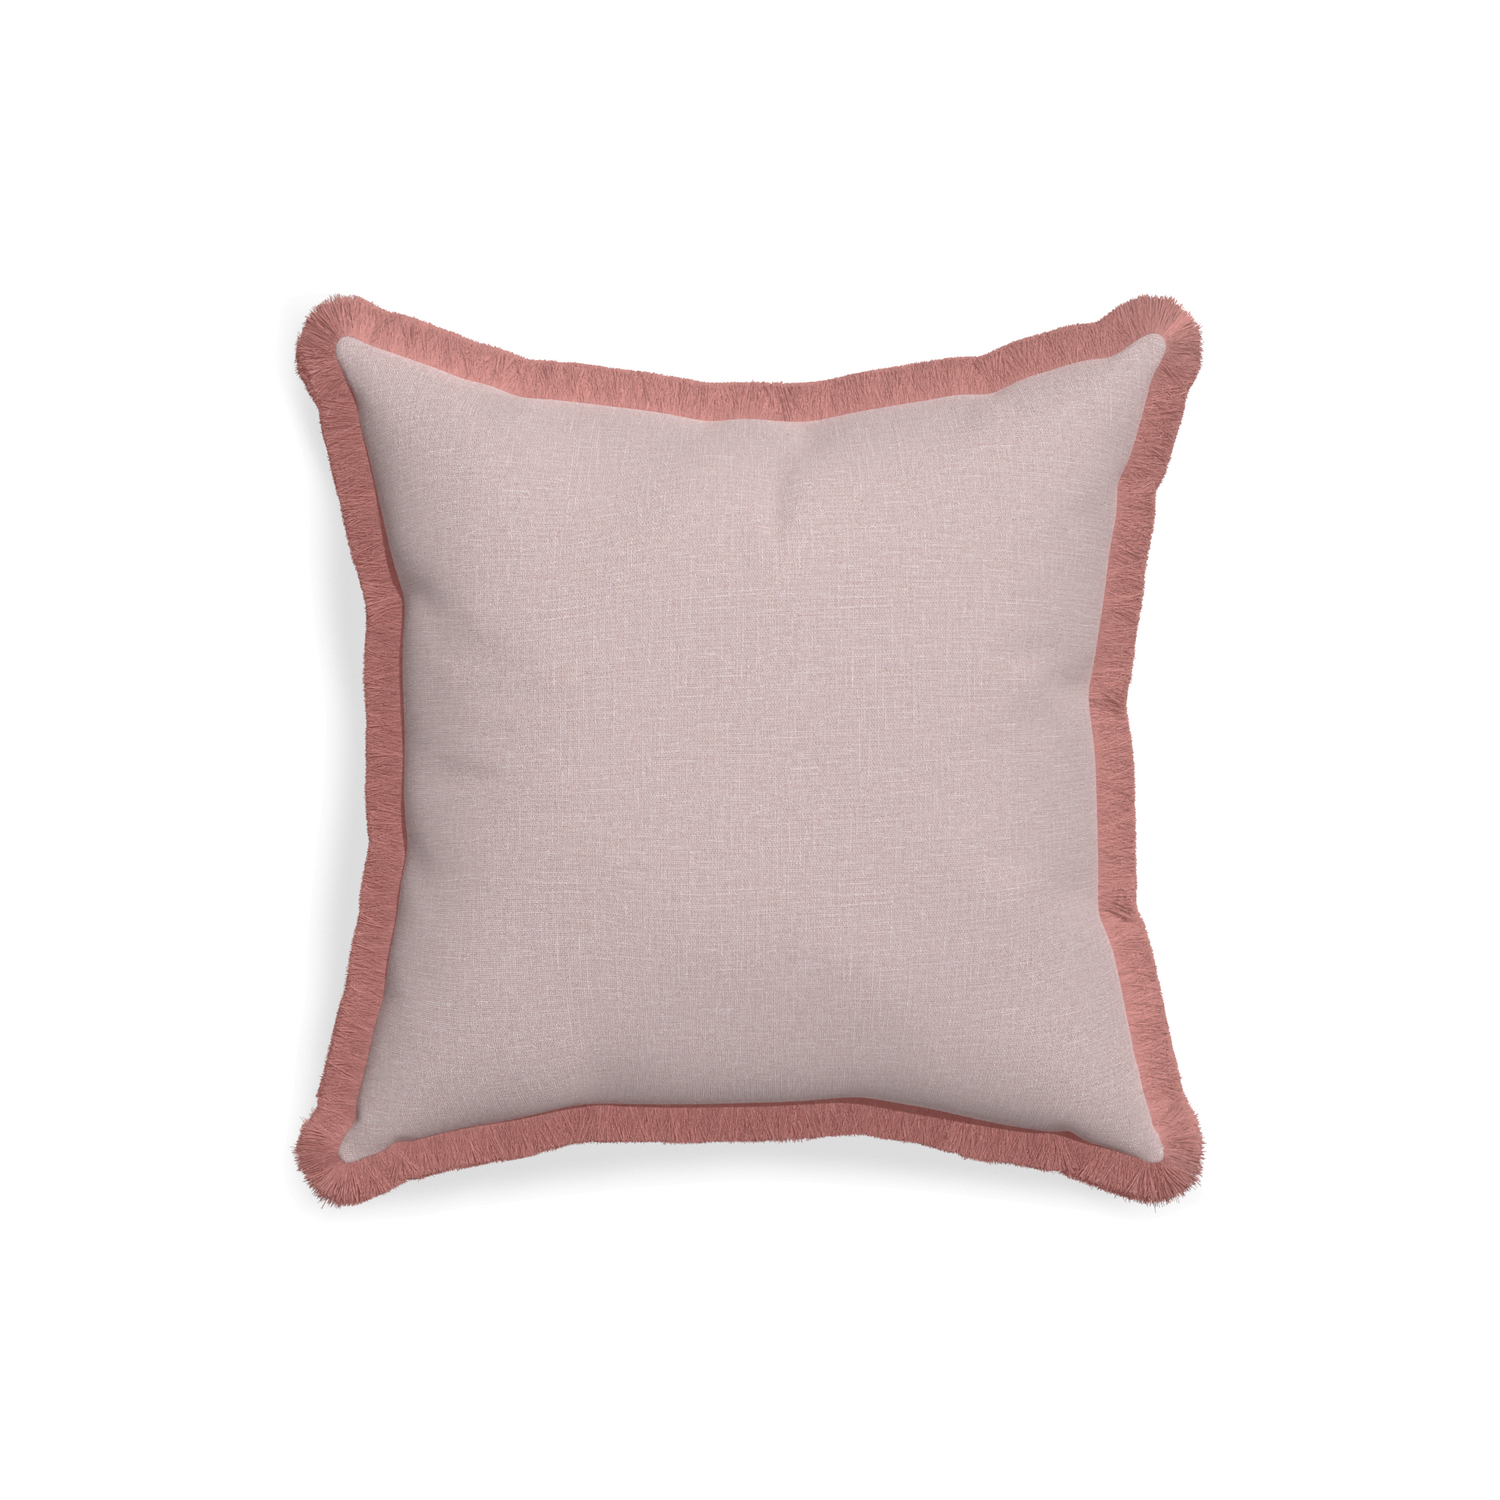 18-square orchid custom mauve pinkpillow with d fringe on white background